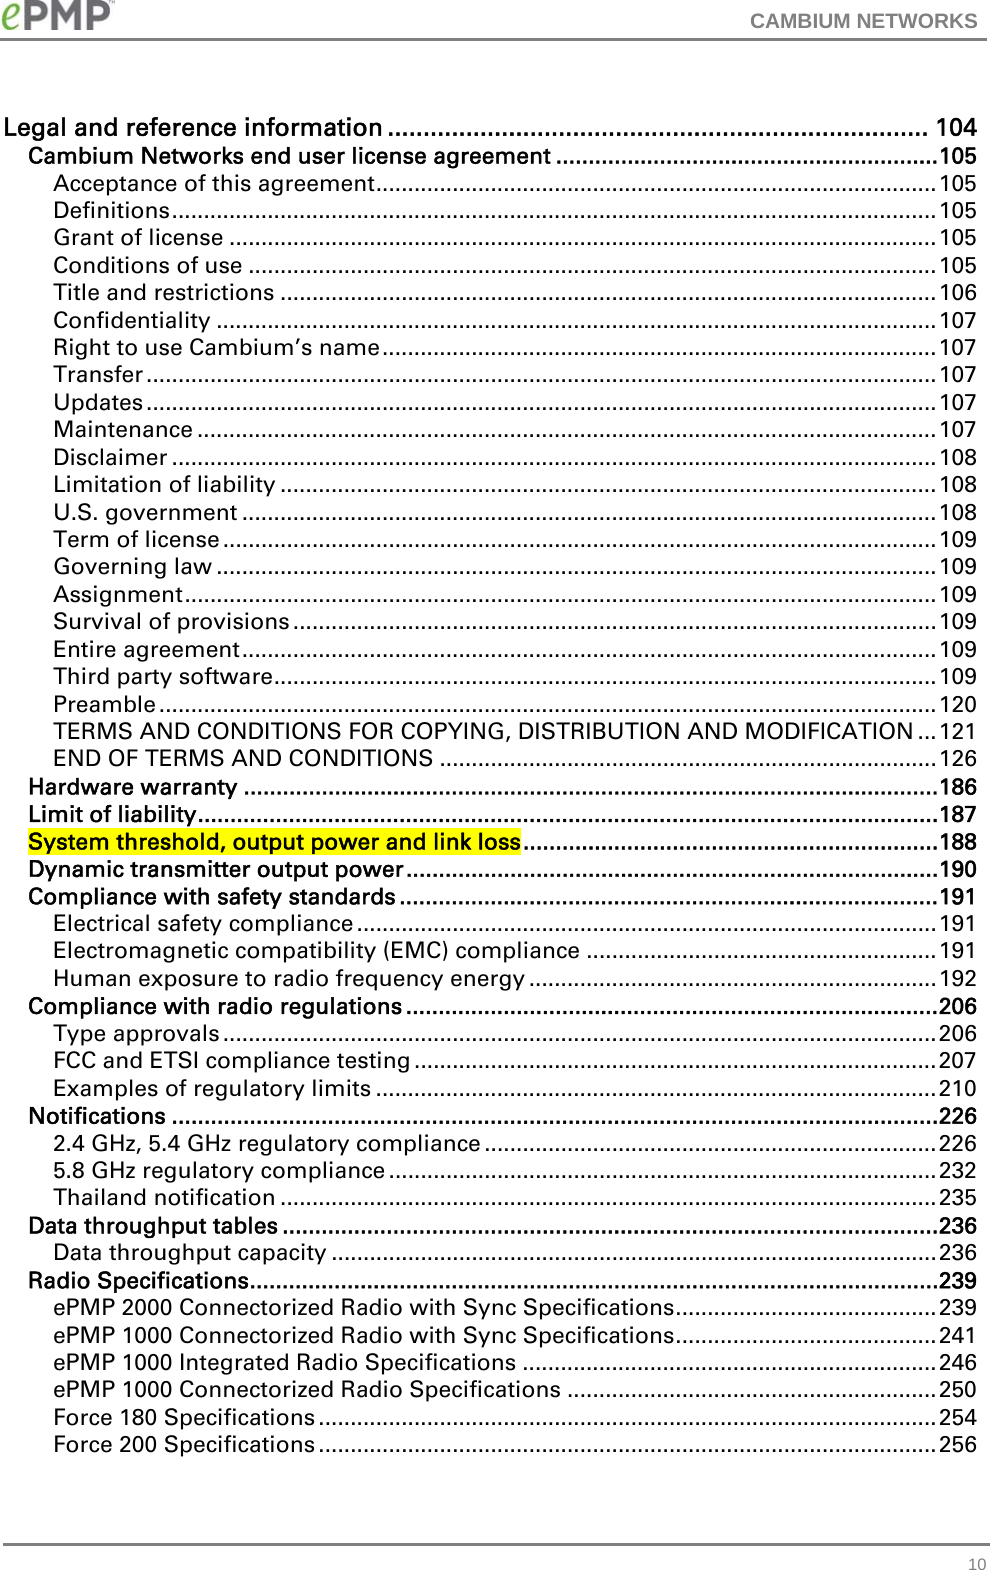 CAMBIUM NETWORKS   10Legal and reference information ............................................................................ 104 Cambium Networks end user license agreement ........................................................... 105 Acceptance of this agreement ........................................................................................ 105 Definitions ........................................................................................................................ 105 Grant of license ............................................................................................................... 105 Conditions of use ............................................................................................................ 105 Title and restrictions ....................................................................................................... 106 Confidentiality ................................................................................................................. 107 Right to use Cambium’s name ....................................................................................... 107 Transfer ............................................................................................................................ 107 Updates ............................................................................................................................ 107 Maintenance .................................................................................................................... 107 Disclaimer ........................................................................................................................ 108 Limitation of liability ....................................................................................................... 108 U.S. government ............................................................................................................. 108 Term of license ................................................................................................................ 109 Governing law ................................................................................................................. 109 Assignment ...................................................................................................................... 109 Survival of provisions ..................................................................................................... 109 Entire agreement ............................................................................................................. 109 Third party software ........................................................................................................ 109 Preamble .......................................................................................................................... 120 TERMS AND CONDITIONS FOR COPYING, DISTRIBUTION AND MODIFICATION ... 121 END OF TERMS AND CONDITIONS .............................................................................. 126 Hardware warranty ........................................................................................................... 186 Limit of liability .................................................................................................................. 187 System threshold, output power and link loss ................................................................ 188 Dynamic transmitter output power .................................................................................. 190 Compliance with safety standards ................................................................................... 191 Electrical safety compliance ........................................................................................... 191 Electromagnetic compatibility (EMC) compliance ....................................................... 191 Human exposure to radio frequency energy ................................................................ 192 Compliance with radio regulations .................................................................................. 206 Type approvals ................................................................................................................ 206 FCC and ETSI compliance testing .................................................................................. 207 Examples of regulatory limits ........................................................................................ 210 Notifications ...................................................................................................................... 226 2.4 GHz, 5.4 GHz regulatory compliance ....................................................................... 226 5.8 GHz regulatory compliance ...................................................................................... 232 Thailand notification ....................................................................................................... 235 Data throughput tables ..................................................................................................... 236 Data throughput capacity ............................................................................................... 236 Radio Specifications .......................................................................................................... 239 ePMP 2000 Connectorized Radio with Sync Specifications ......................................... 239 ePMP 1000 Connectorized Radio with Sync Specifications ......................................... 241 ePMP 1000 Integrated Radio Specifications ................................................................. 246 ePMP 1000 Connectorized Radio Specifications .......................................................... 250 Force 180 Specifications ................................................................................................. 254 Force 200 Specifications ................................................................................................. 256 